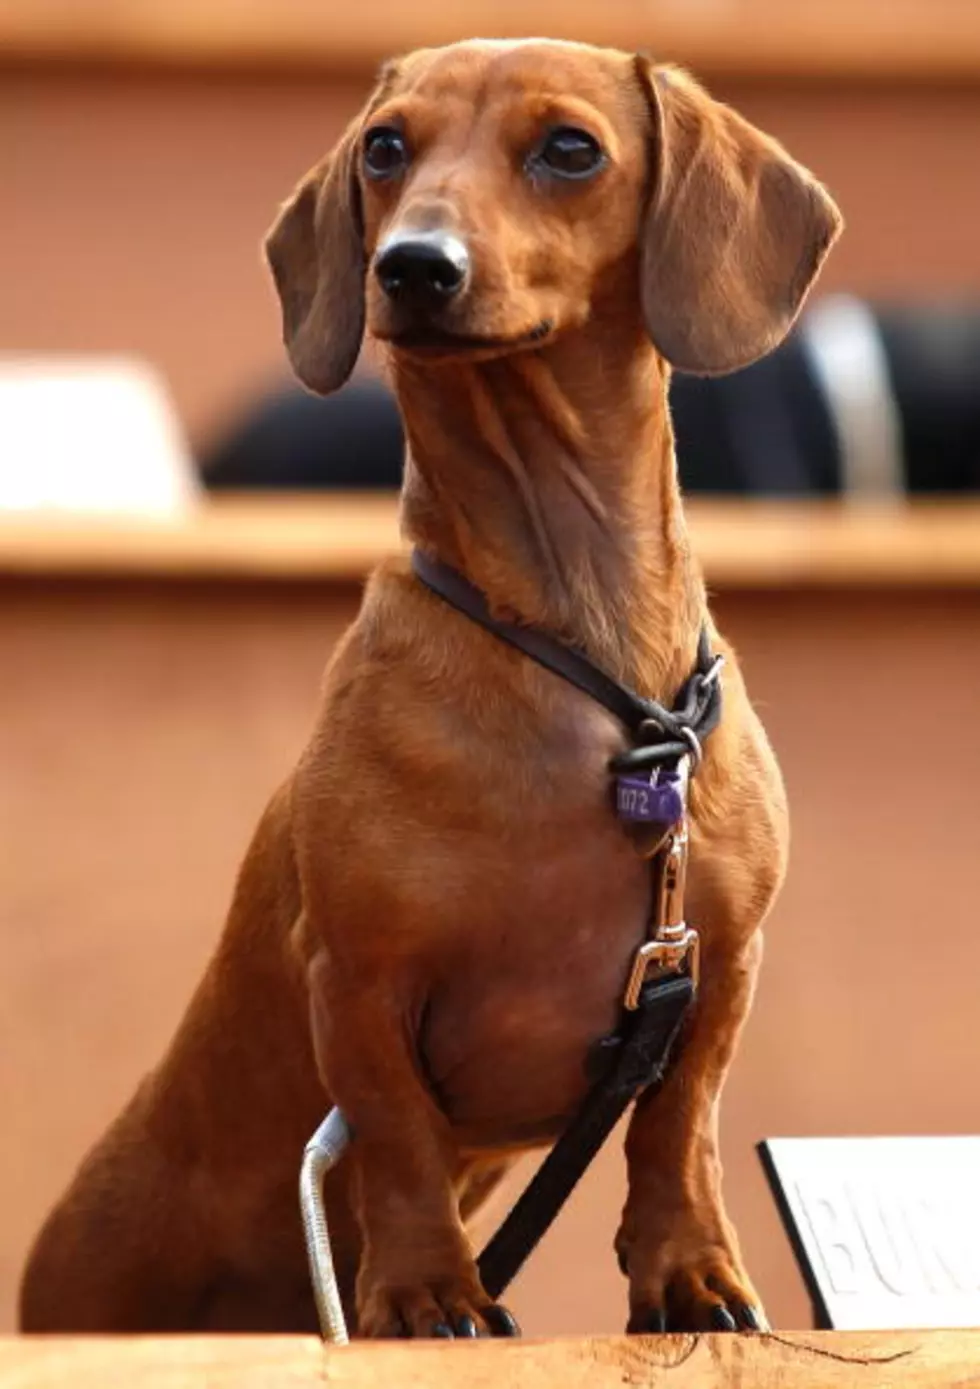 Dieting Dachshund Loses 75% of His Body Weight. Now He’s Ripped! [Watch]